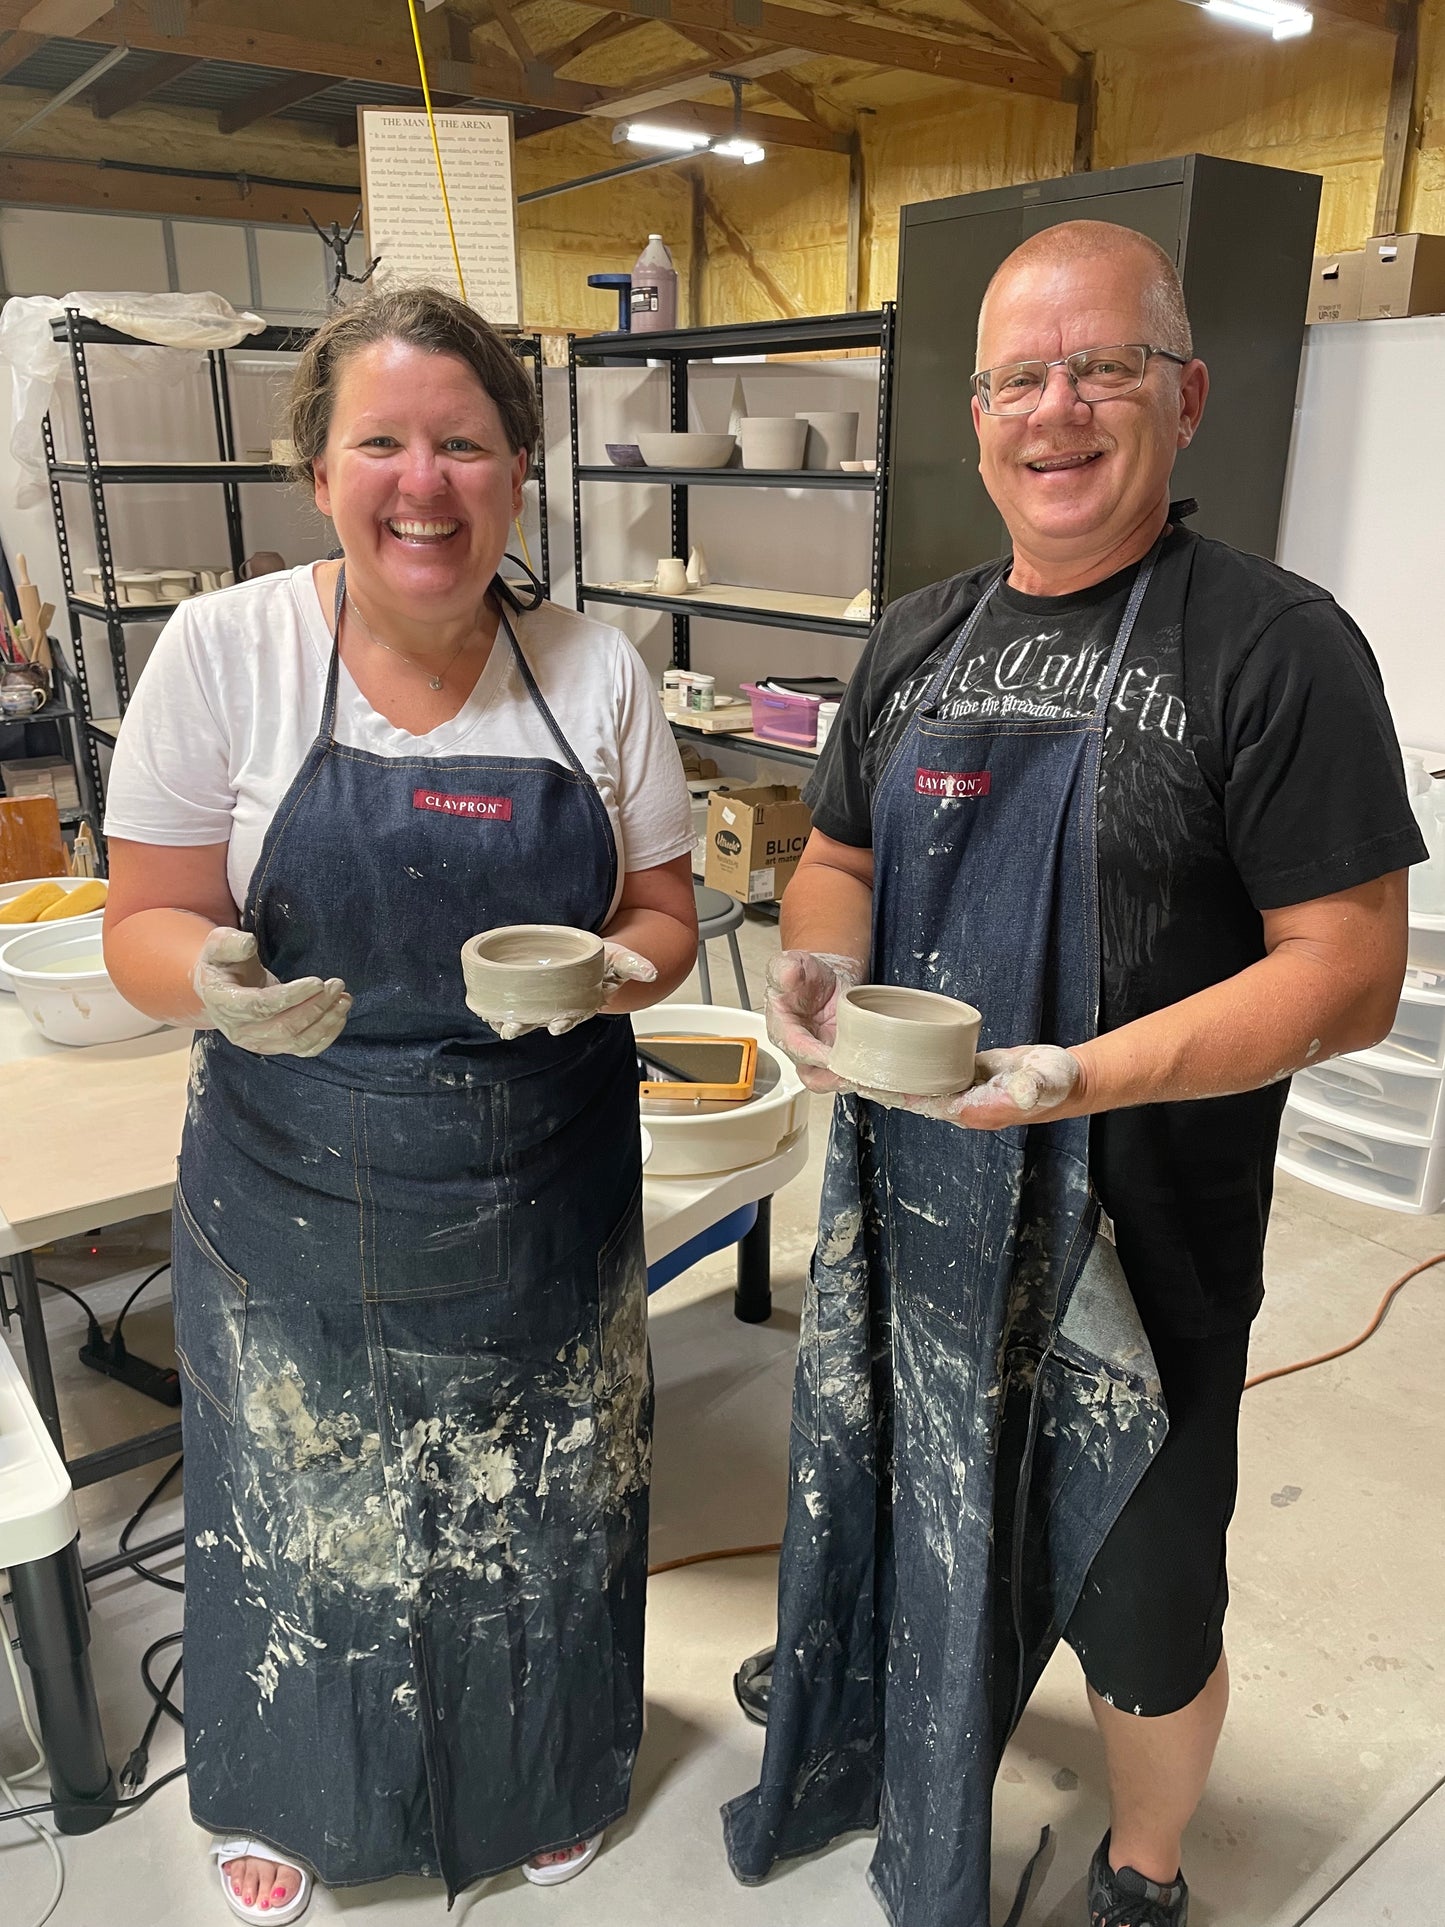 Date Night on the Pottery Wheel